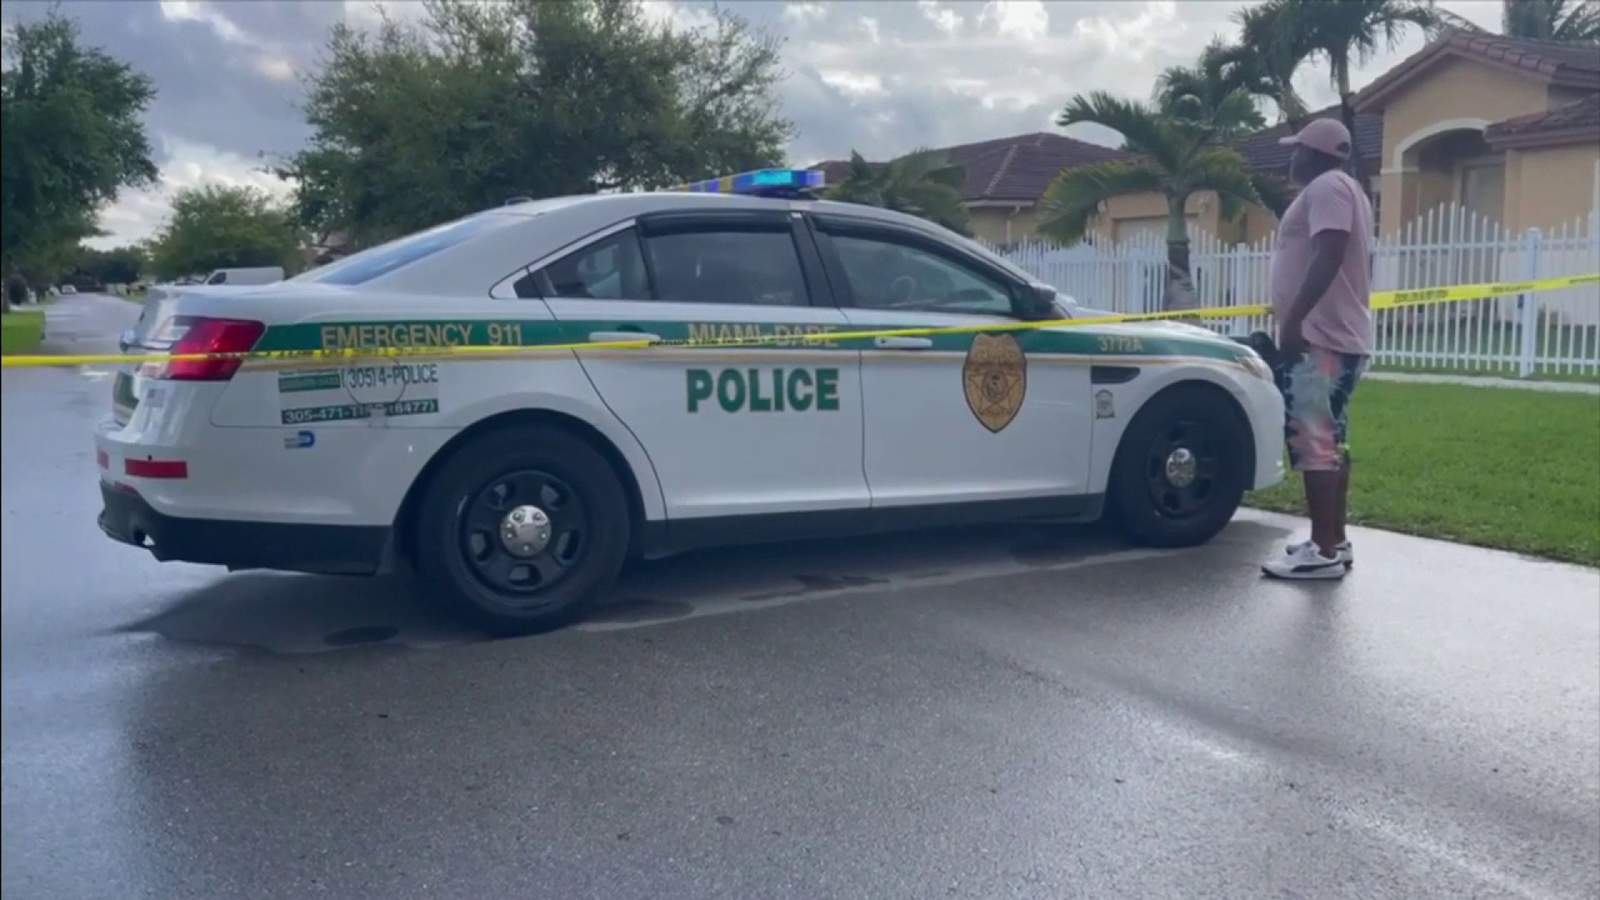 Police continue to search for sniper after deadly shooting in southwest Miami-Dade